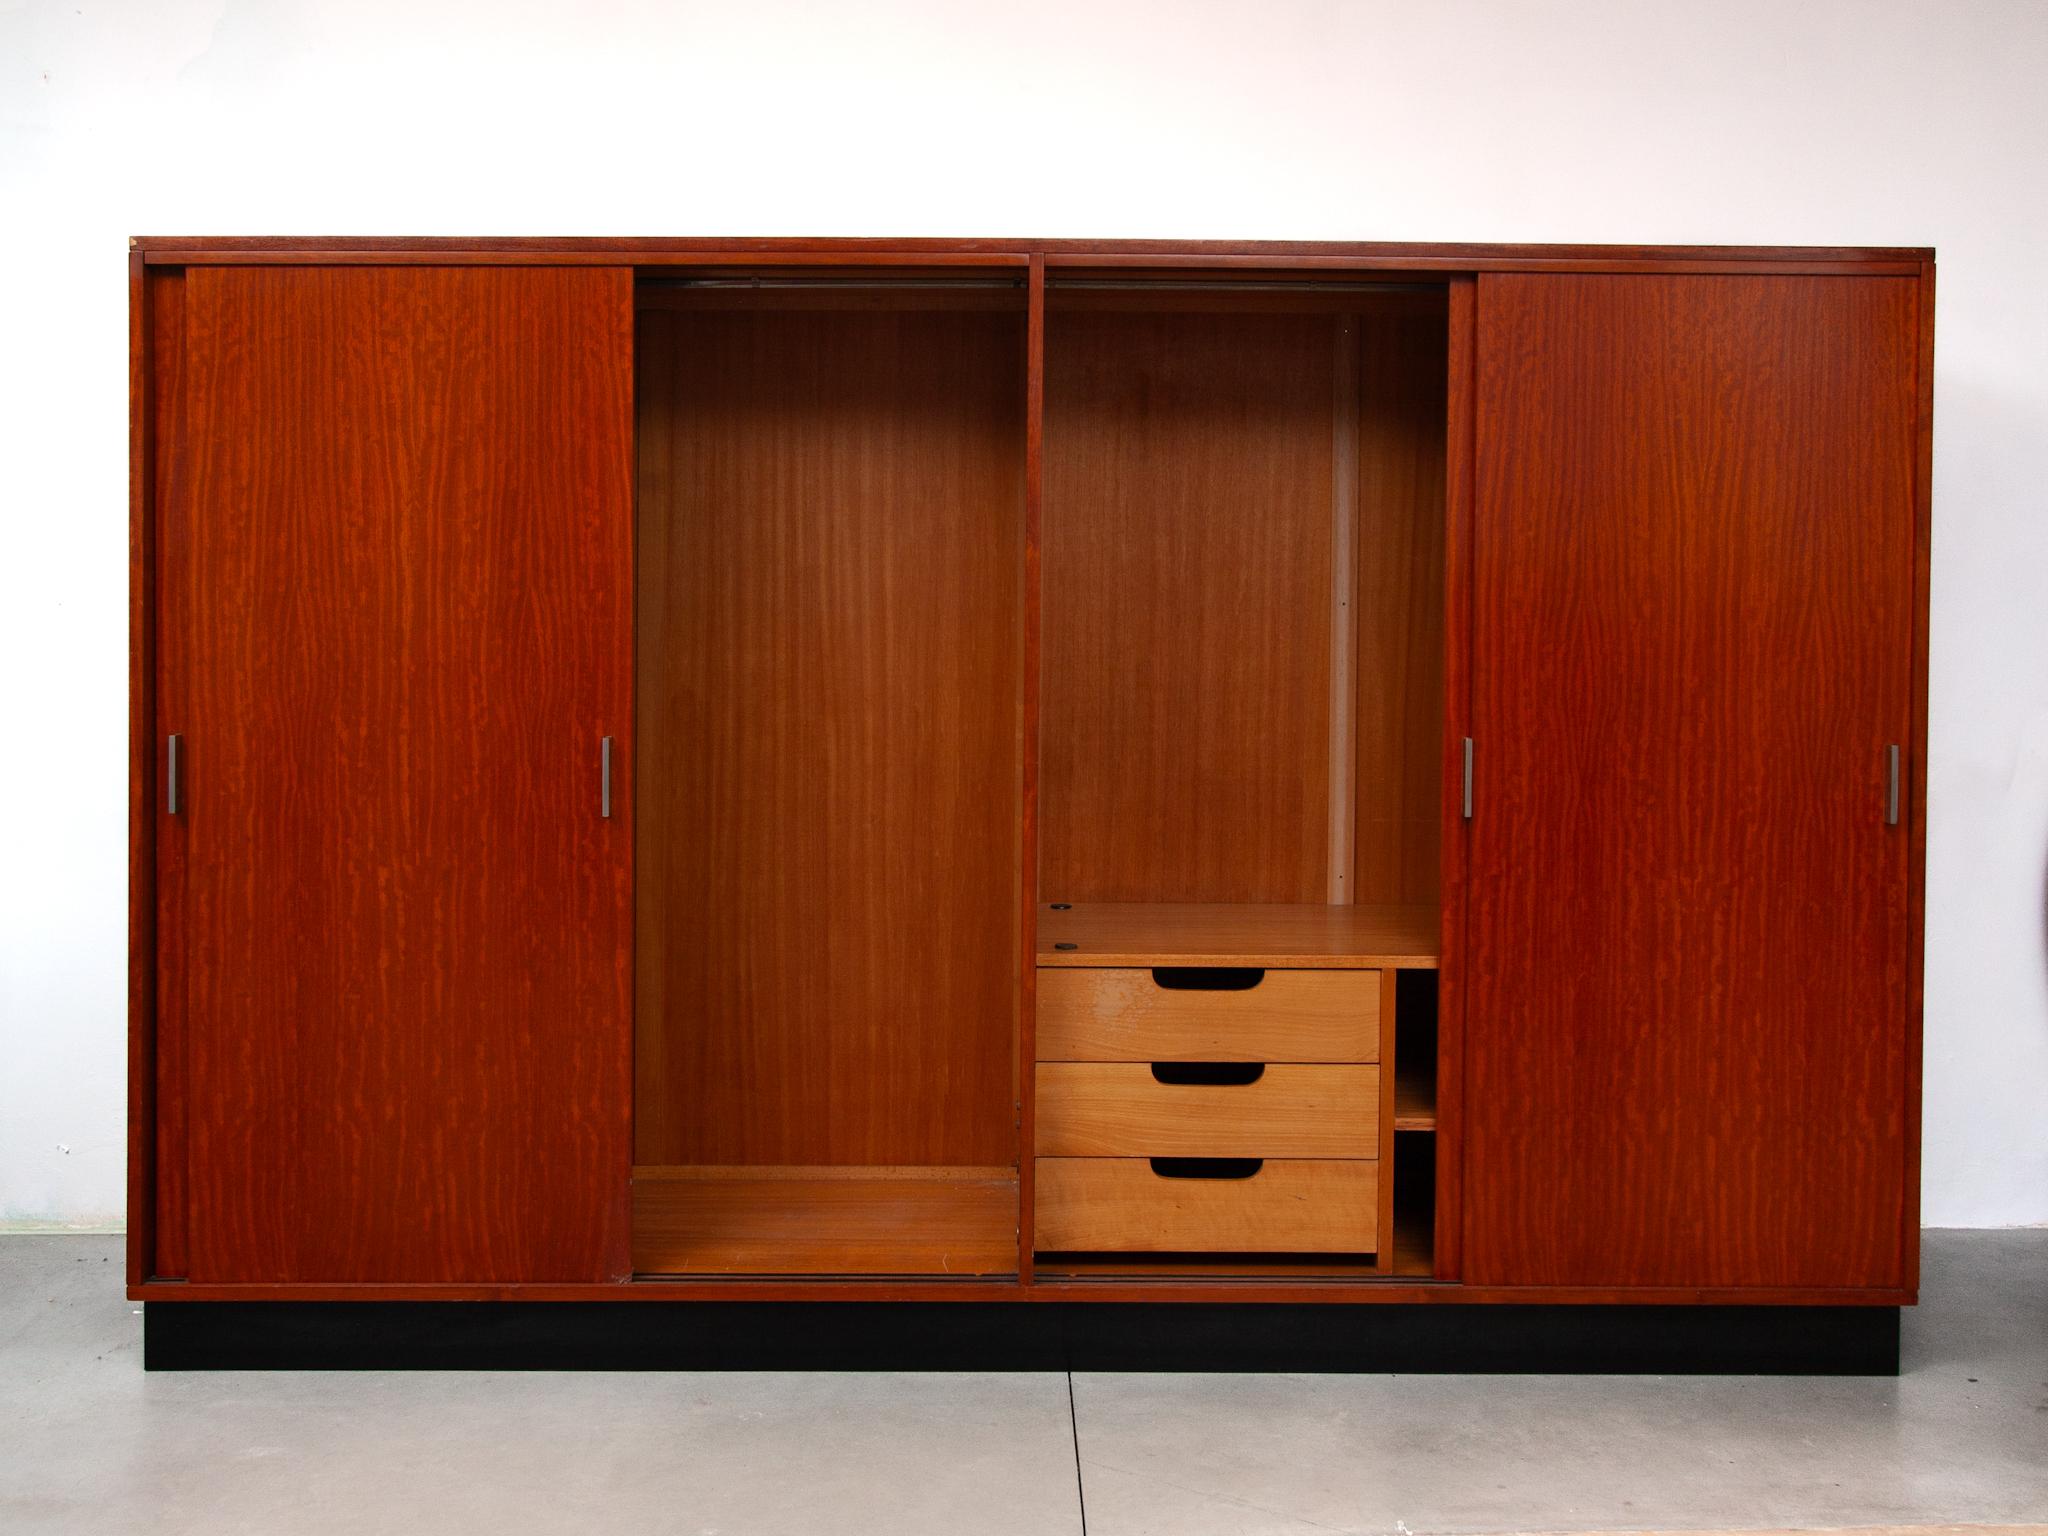 Hand-Crafted Large Four Sliding Doors Wardrobe designed by Alfred Hendrickx, 1960